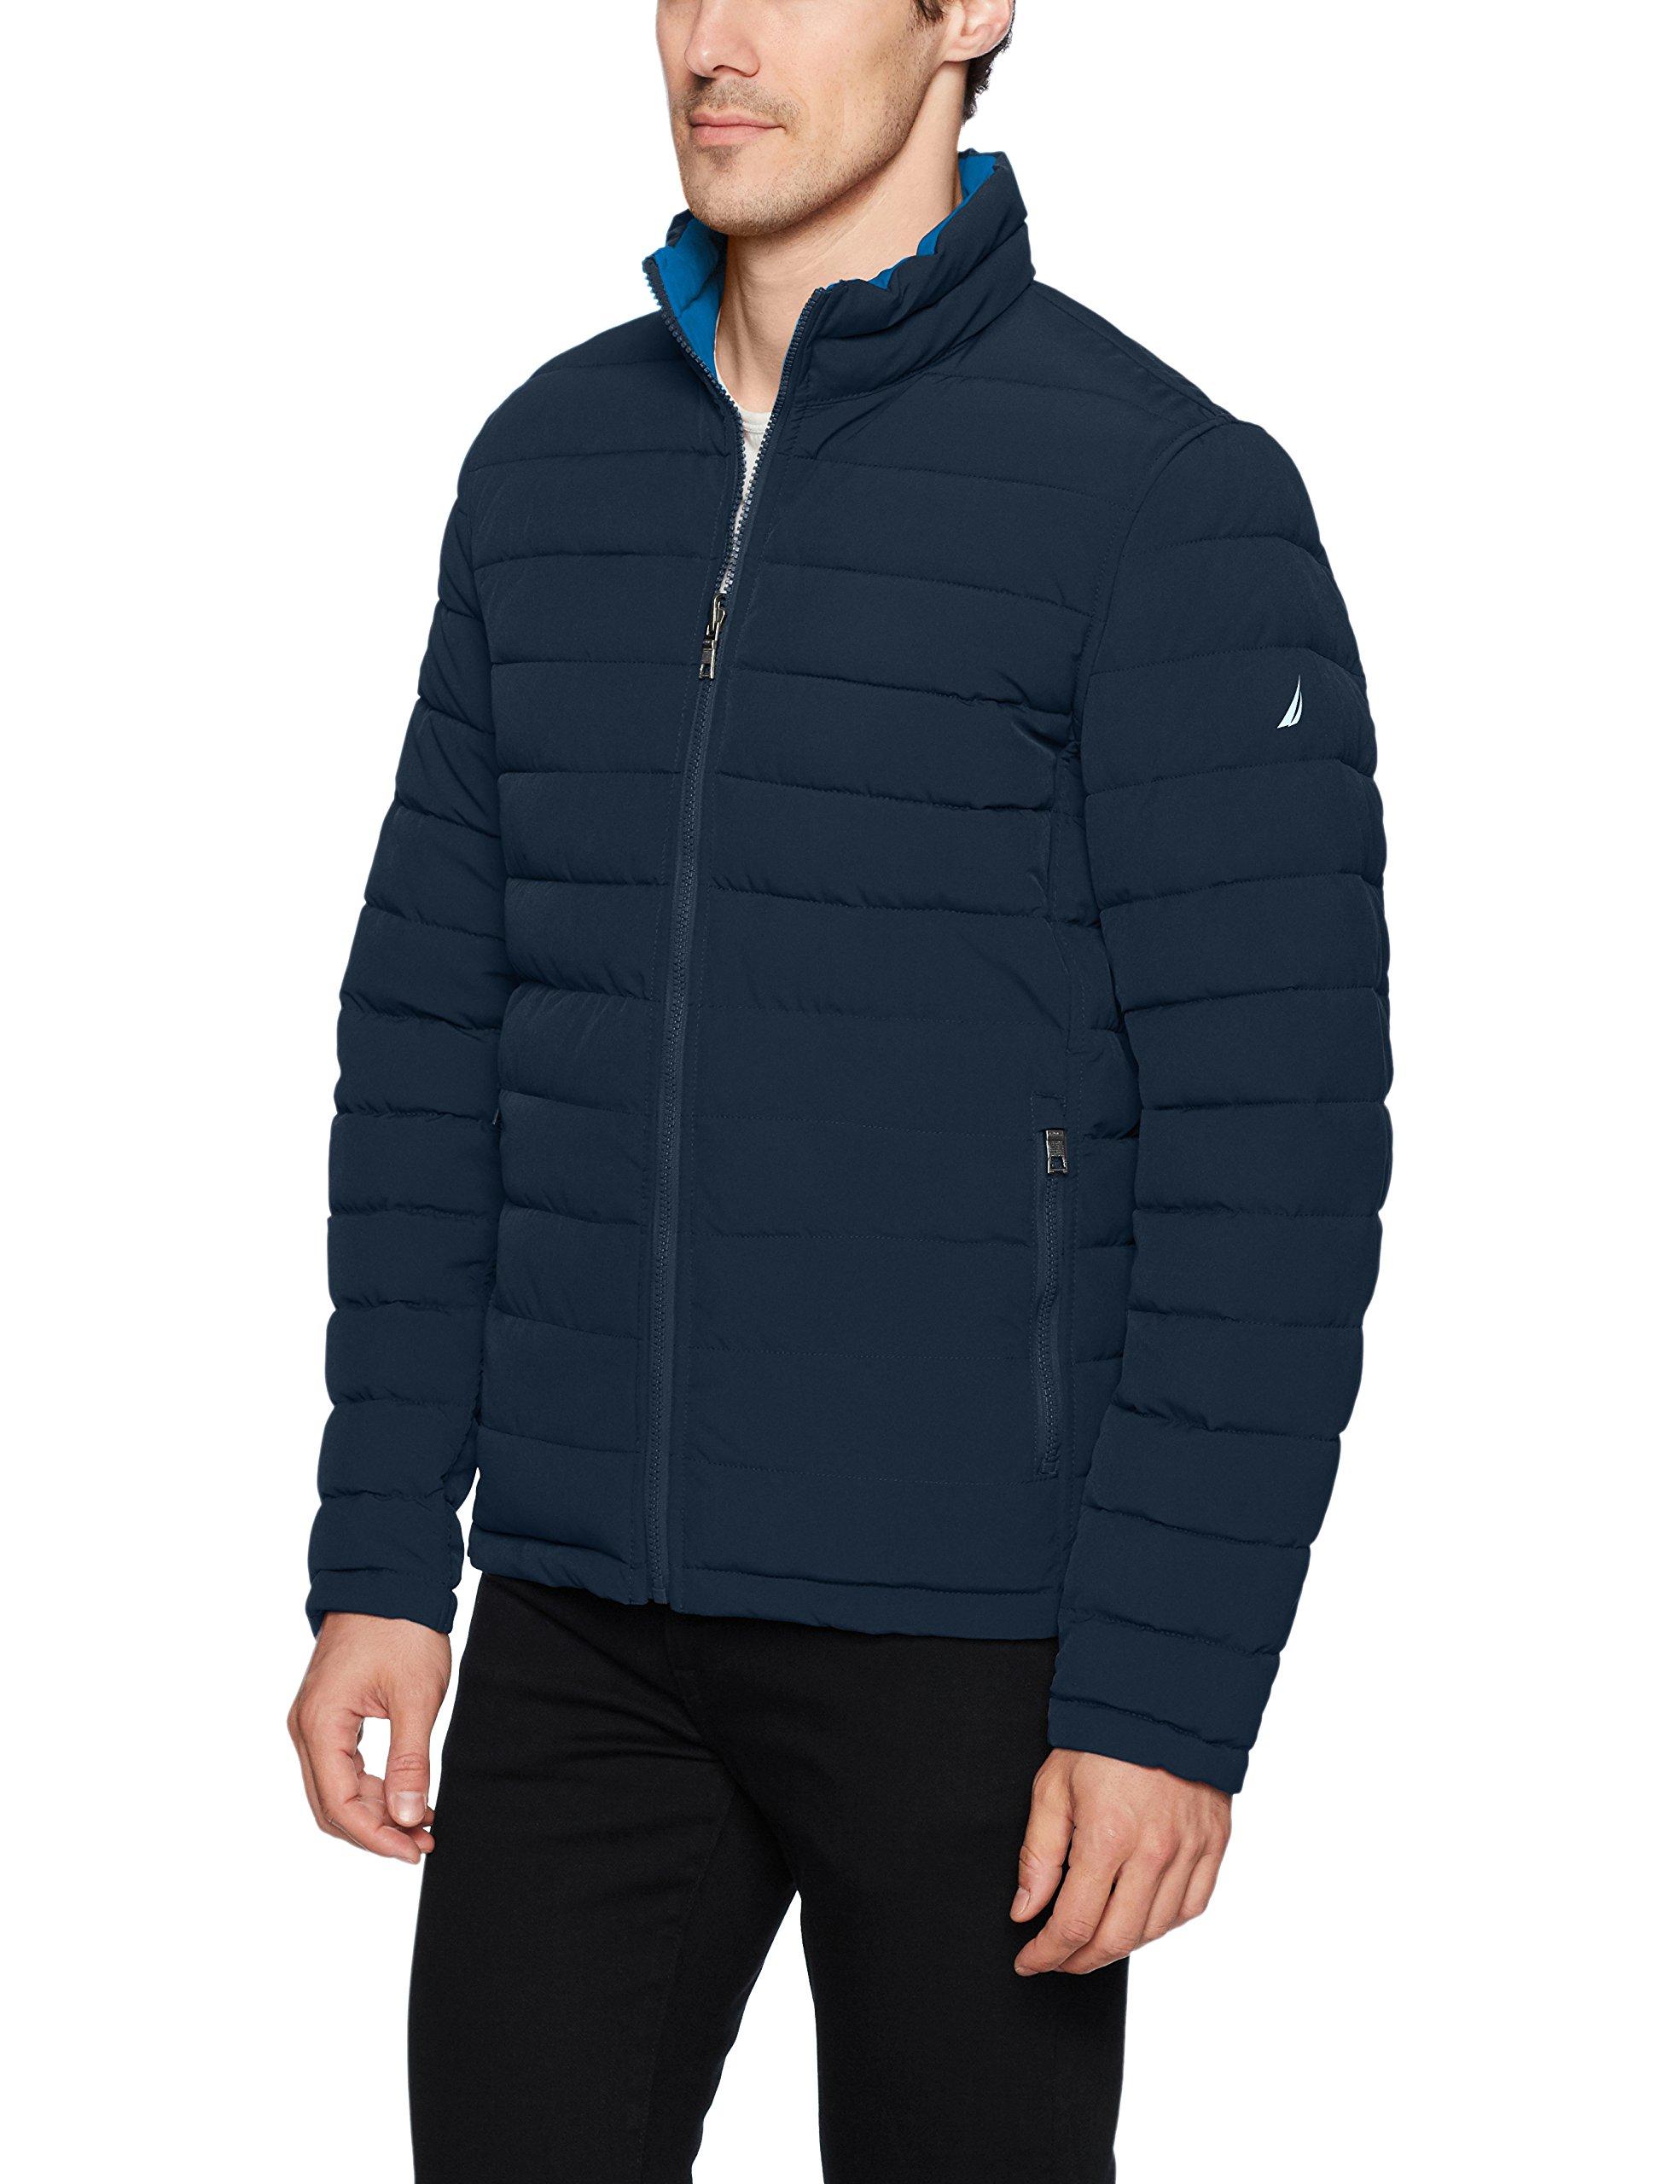 Nautica Poly Stretch Reversible Midweight Jacket in Blue for Men